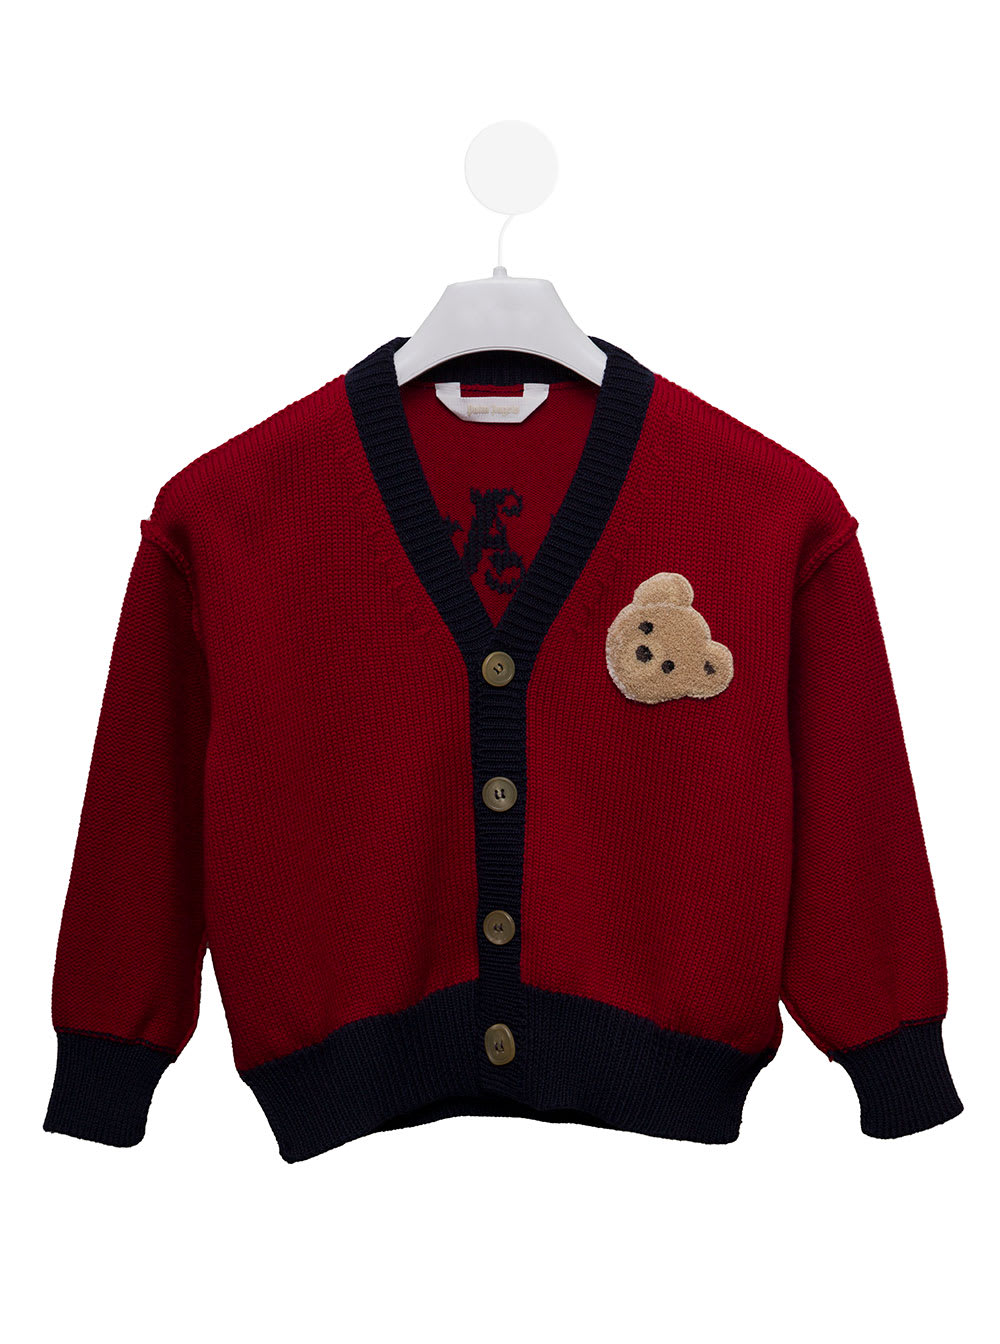 PALM ANGELS PALM ANGELS KIDS BABY BOYS RED BEAR CARDIGAN WITH LOGO